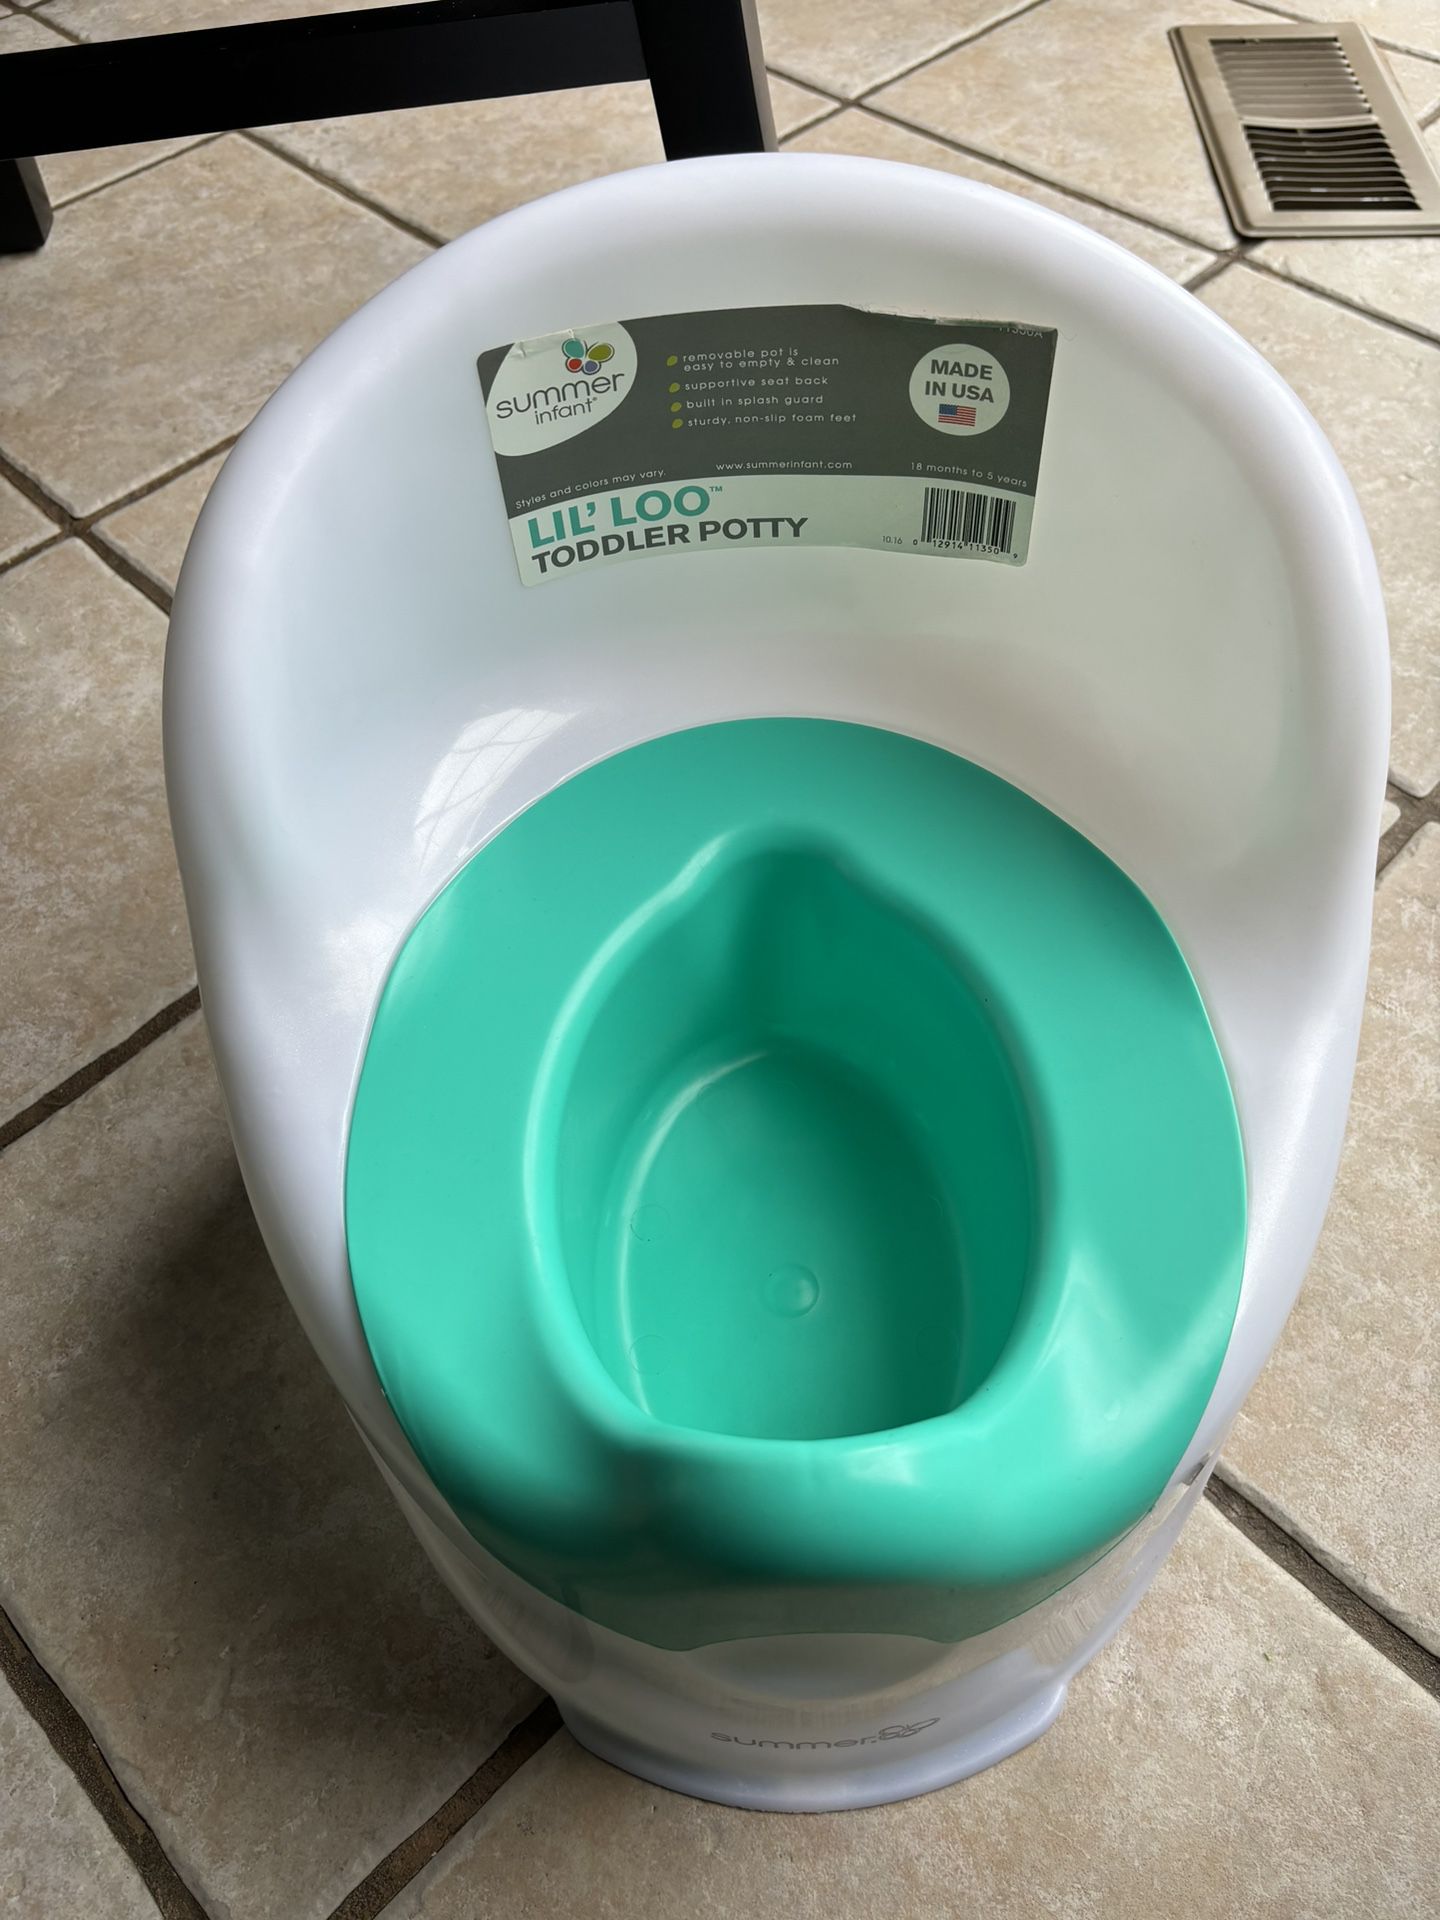 Summer Infant Lil’ Loo Toddler Potty FREE